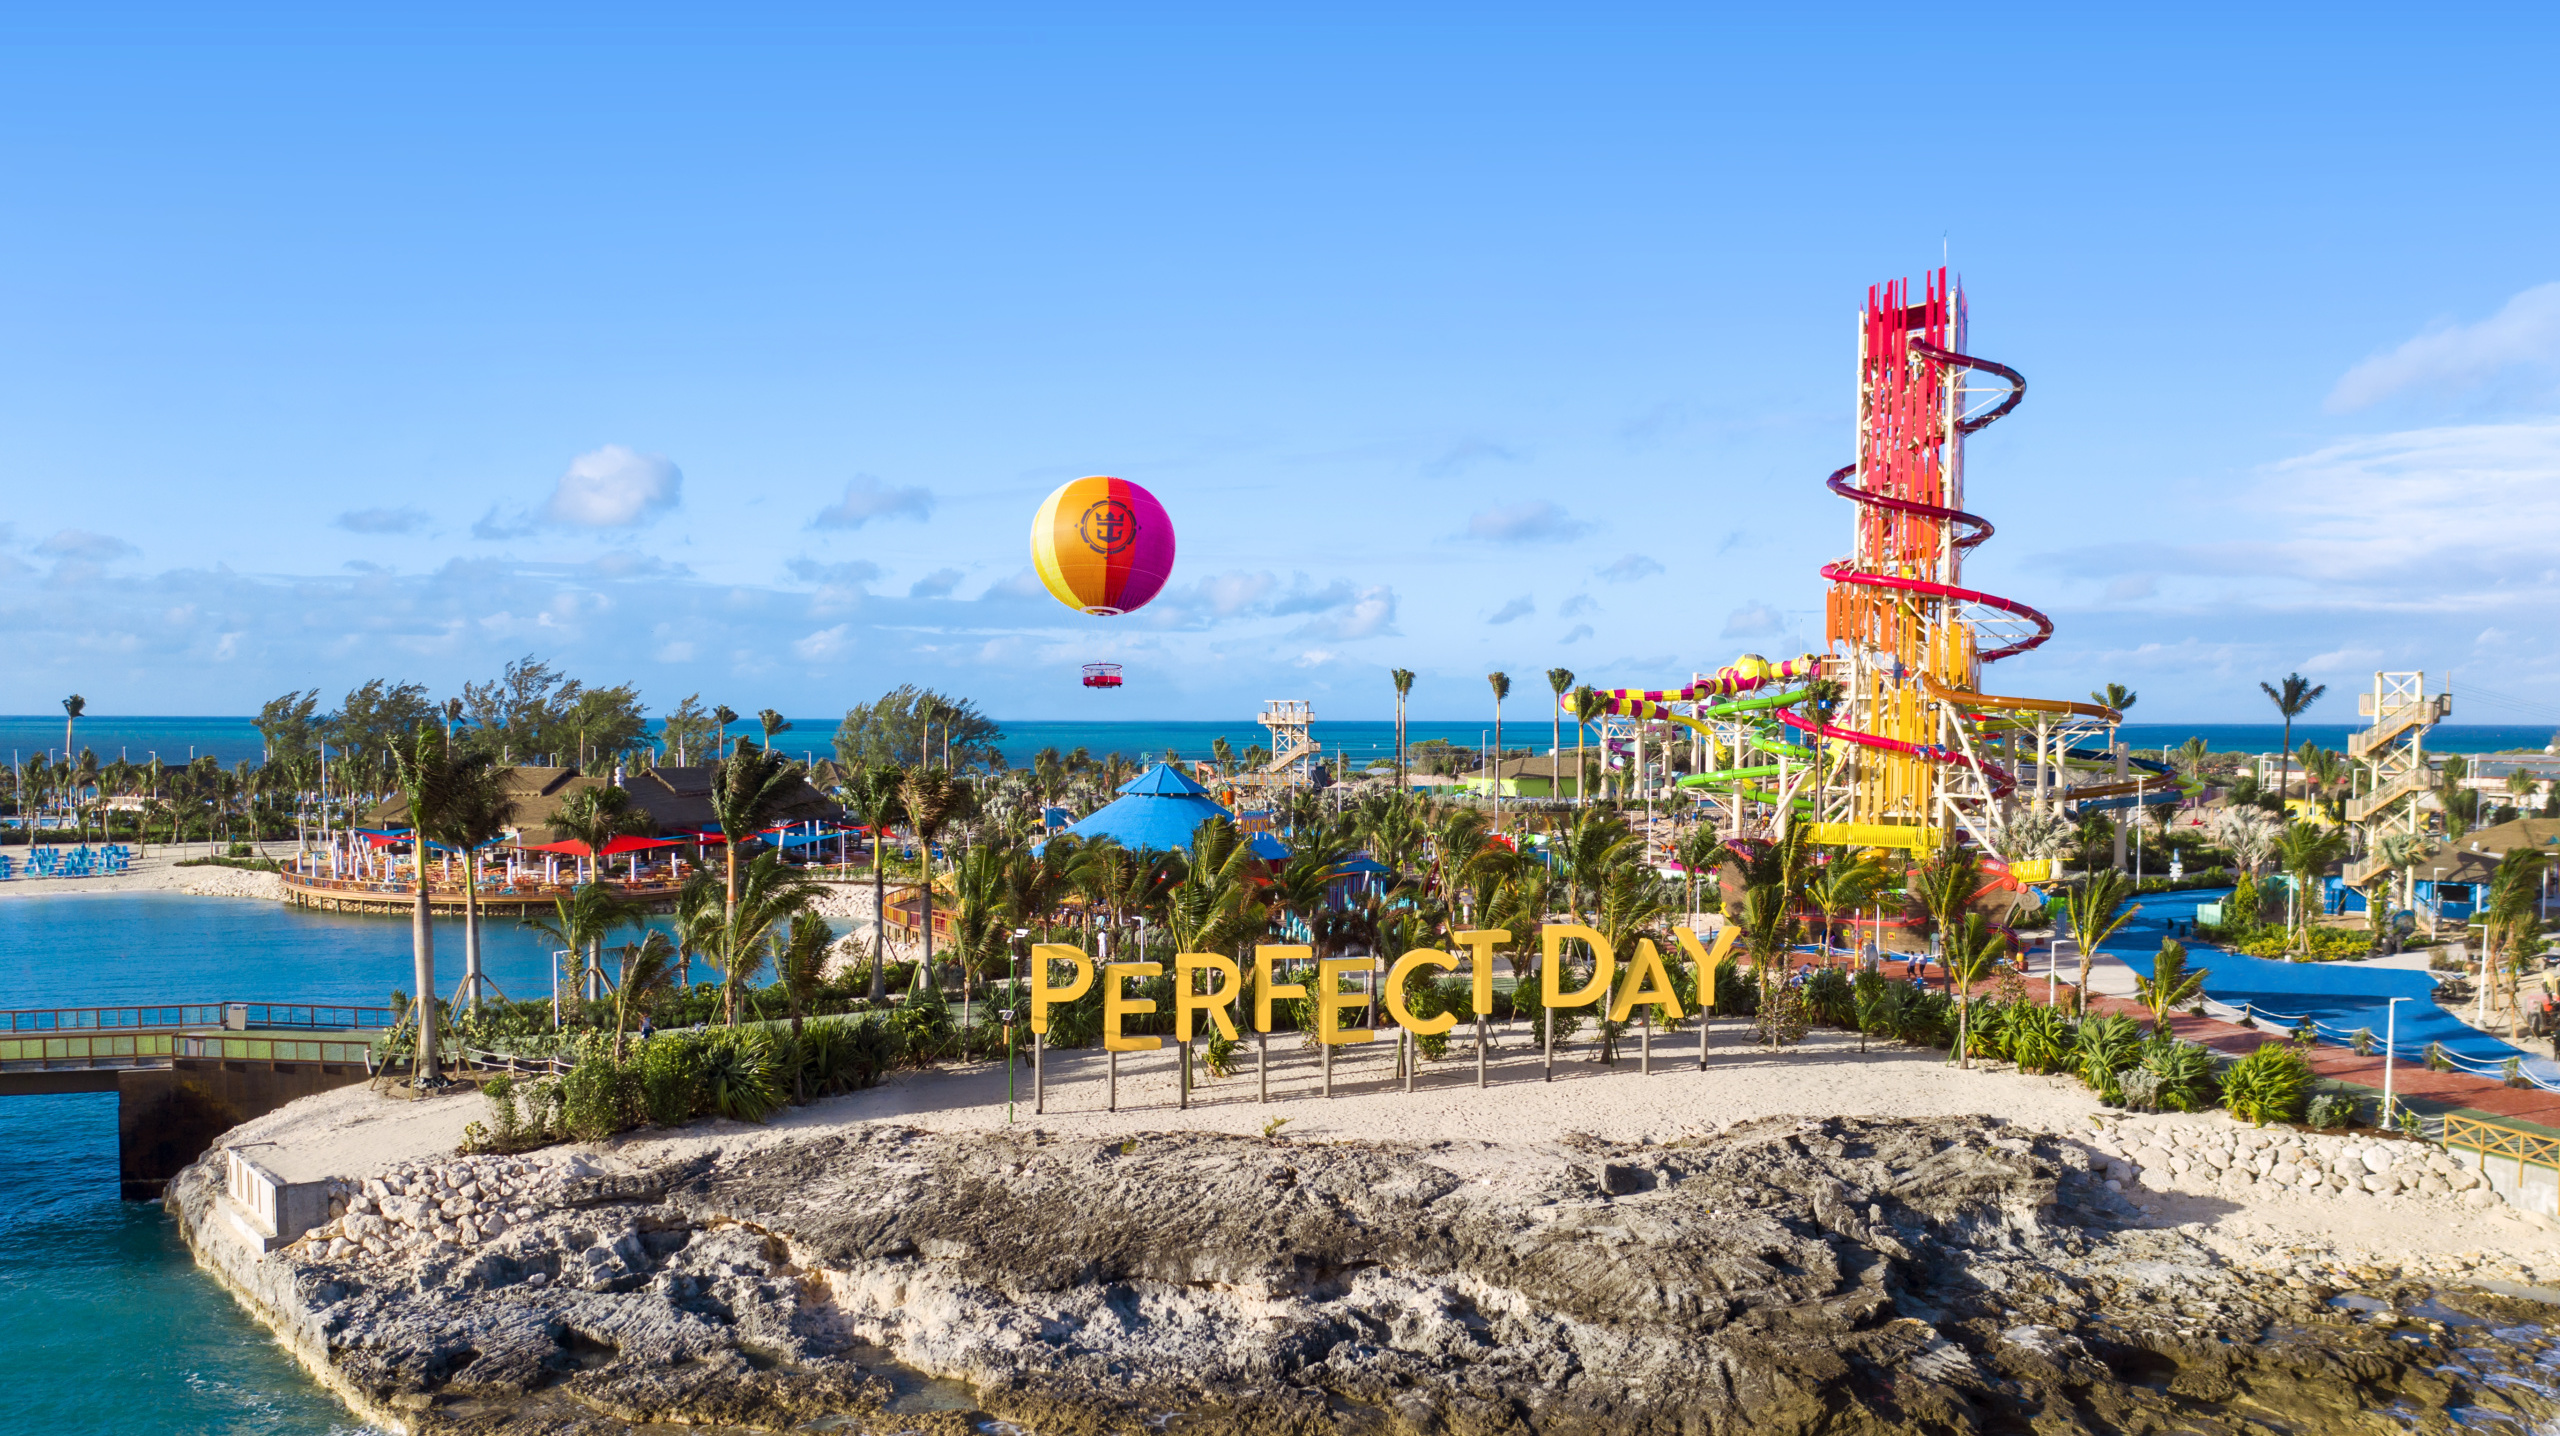 Overview, Perfect Day at CoCoCay, The Bahamas, Photo08